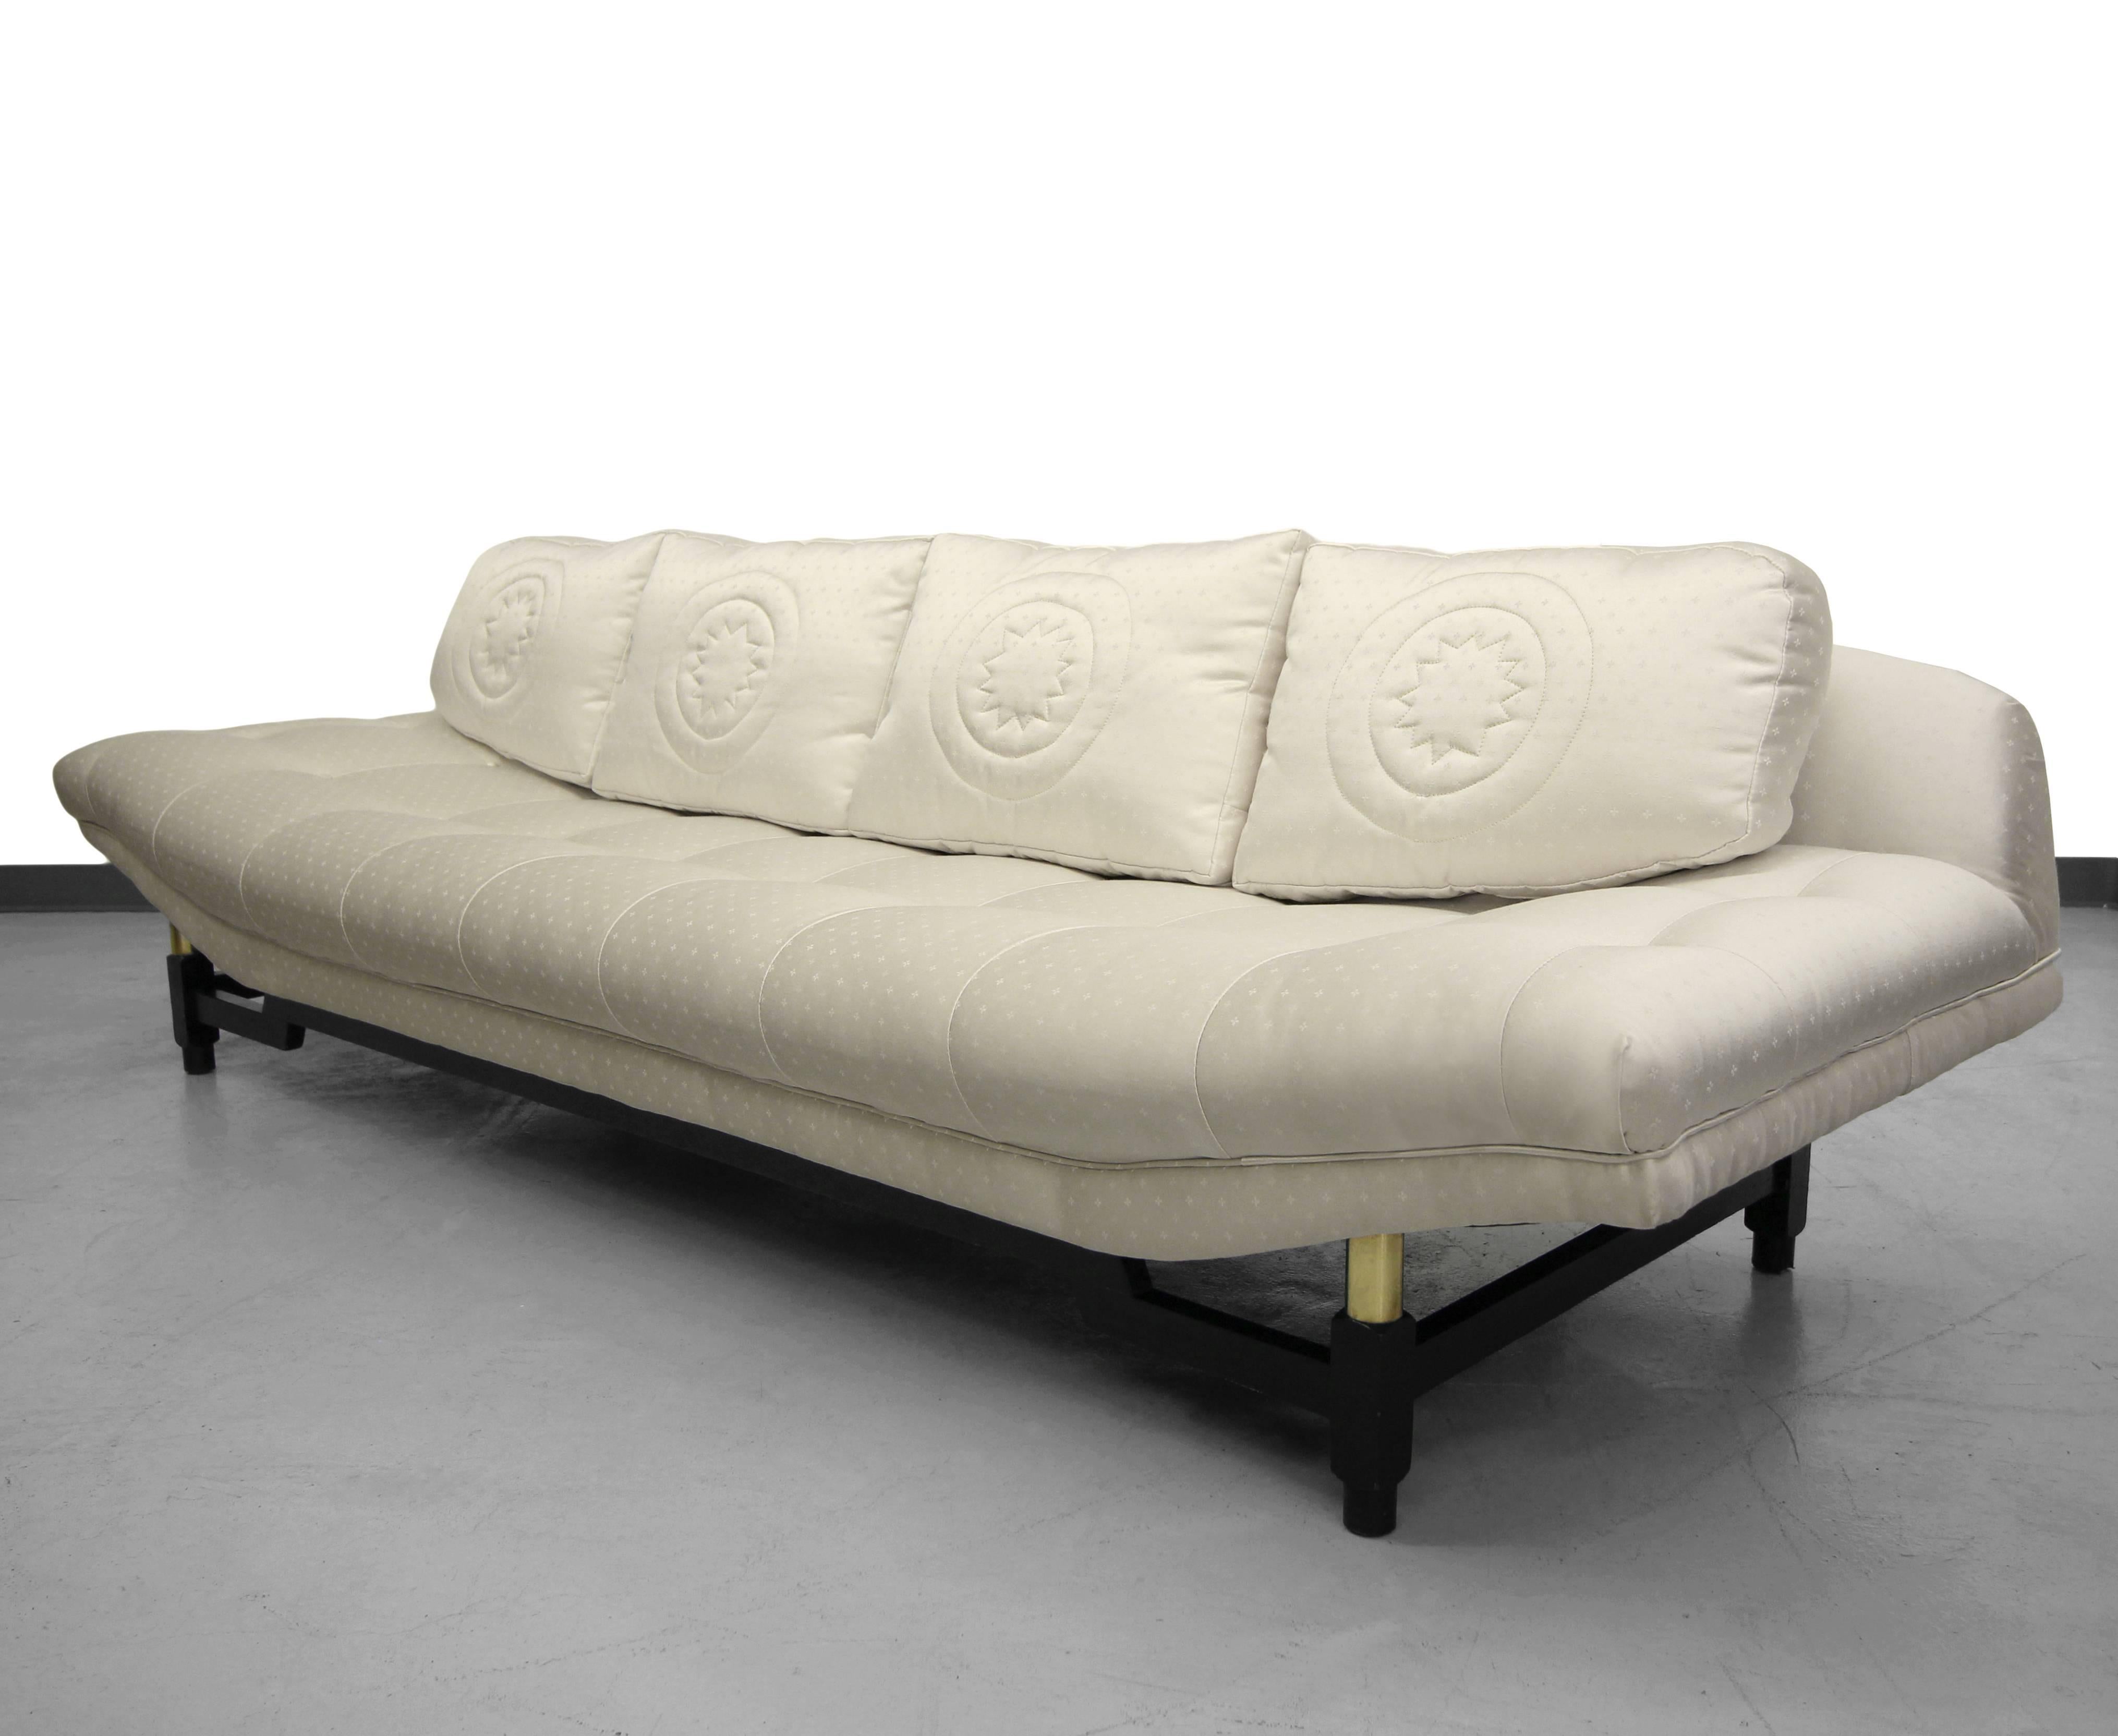 Mid-Century Gondola sofa by Baker Furniture.  Sofa has super clean lines with a bit of Asian flair. This beautiful sofa is unlike any other gondola sofa. 

Base is tubular wood finished in black lacquer with brass details. Fabric is a vanilla